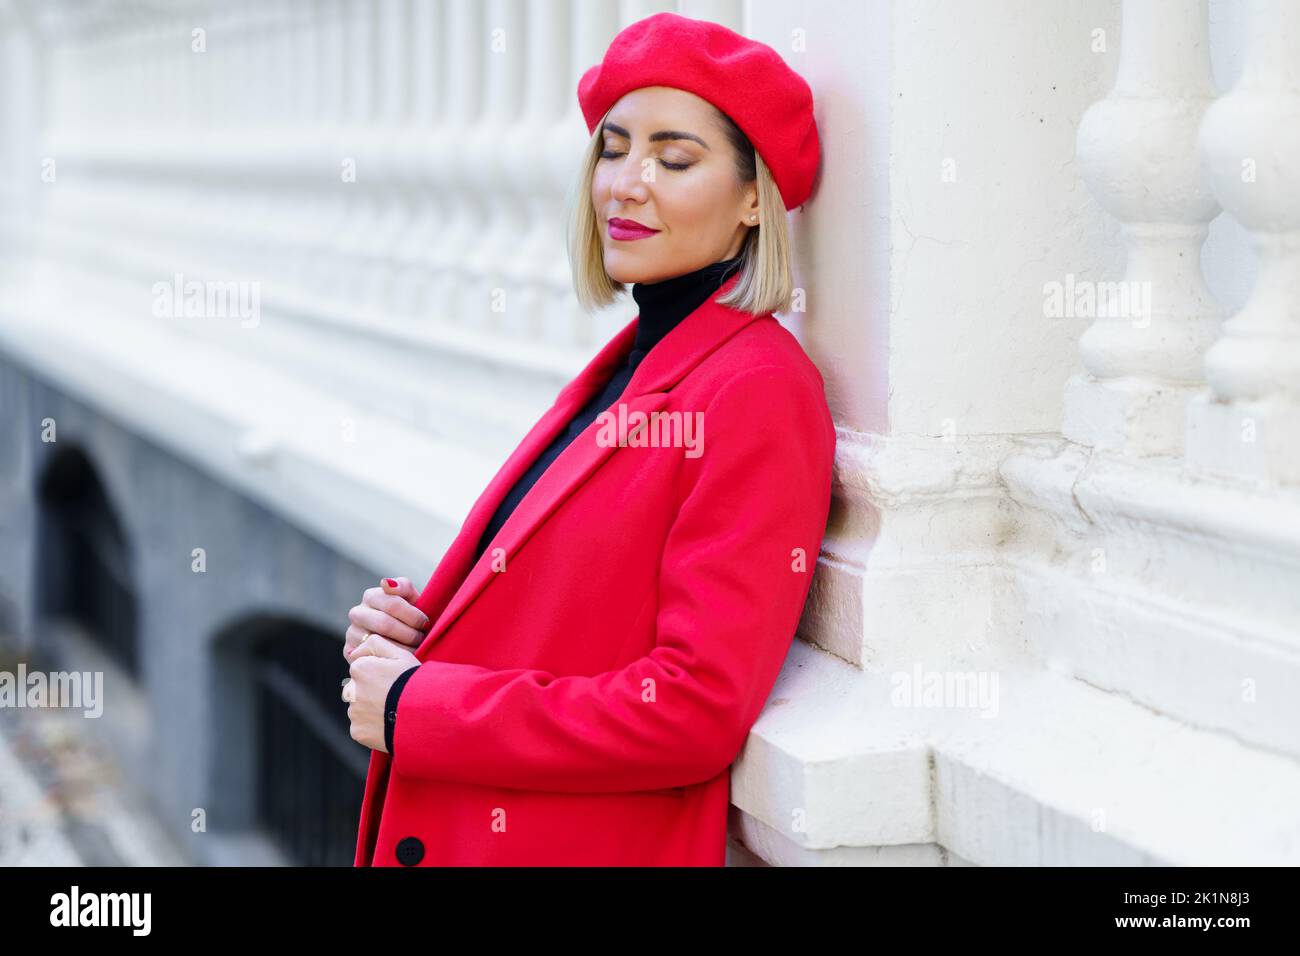 Charming woman in red outfit near fence Stock Photo